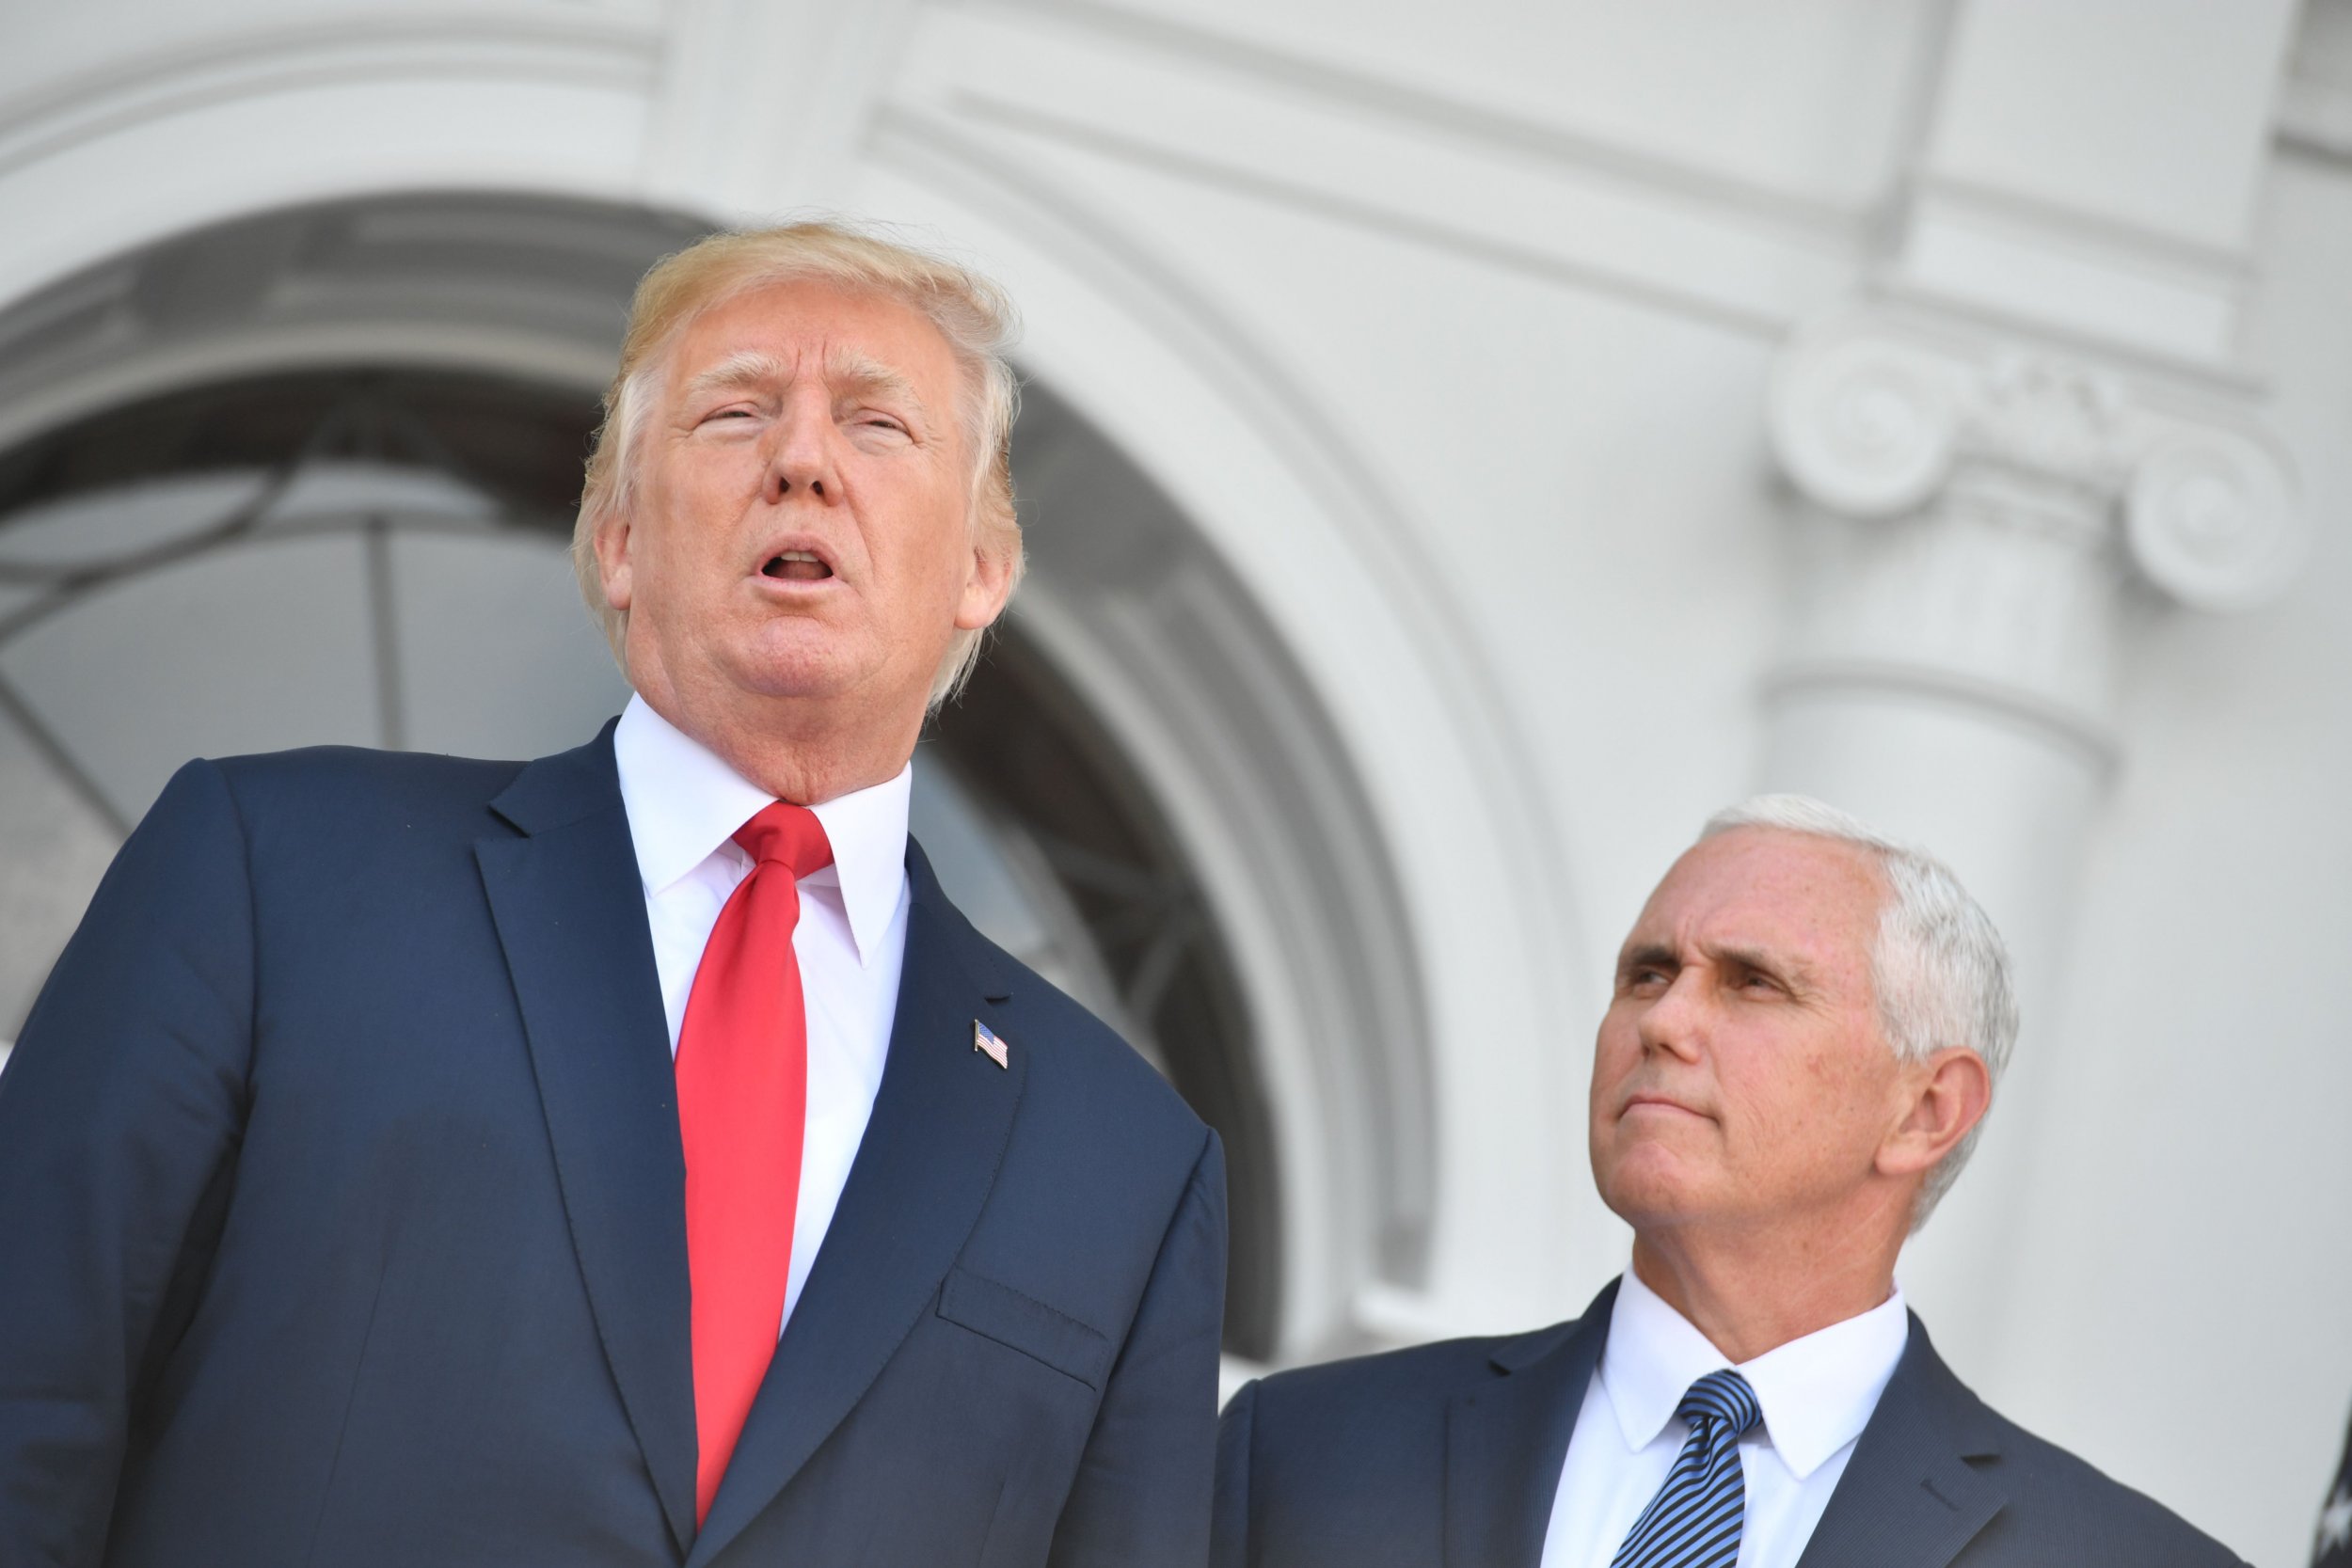 How Long Will Pence Stay Loyal to Trump? A Key Test Looms